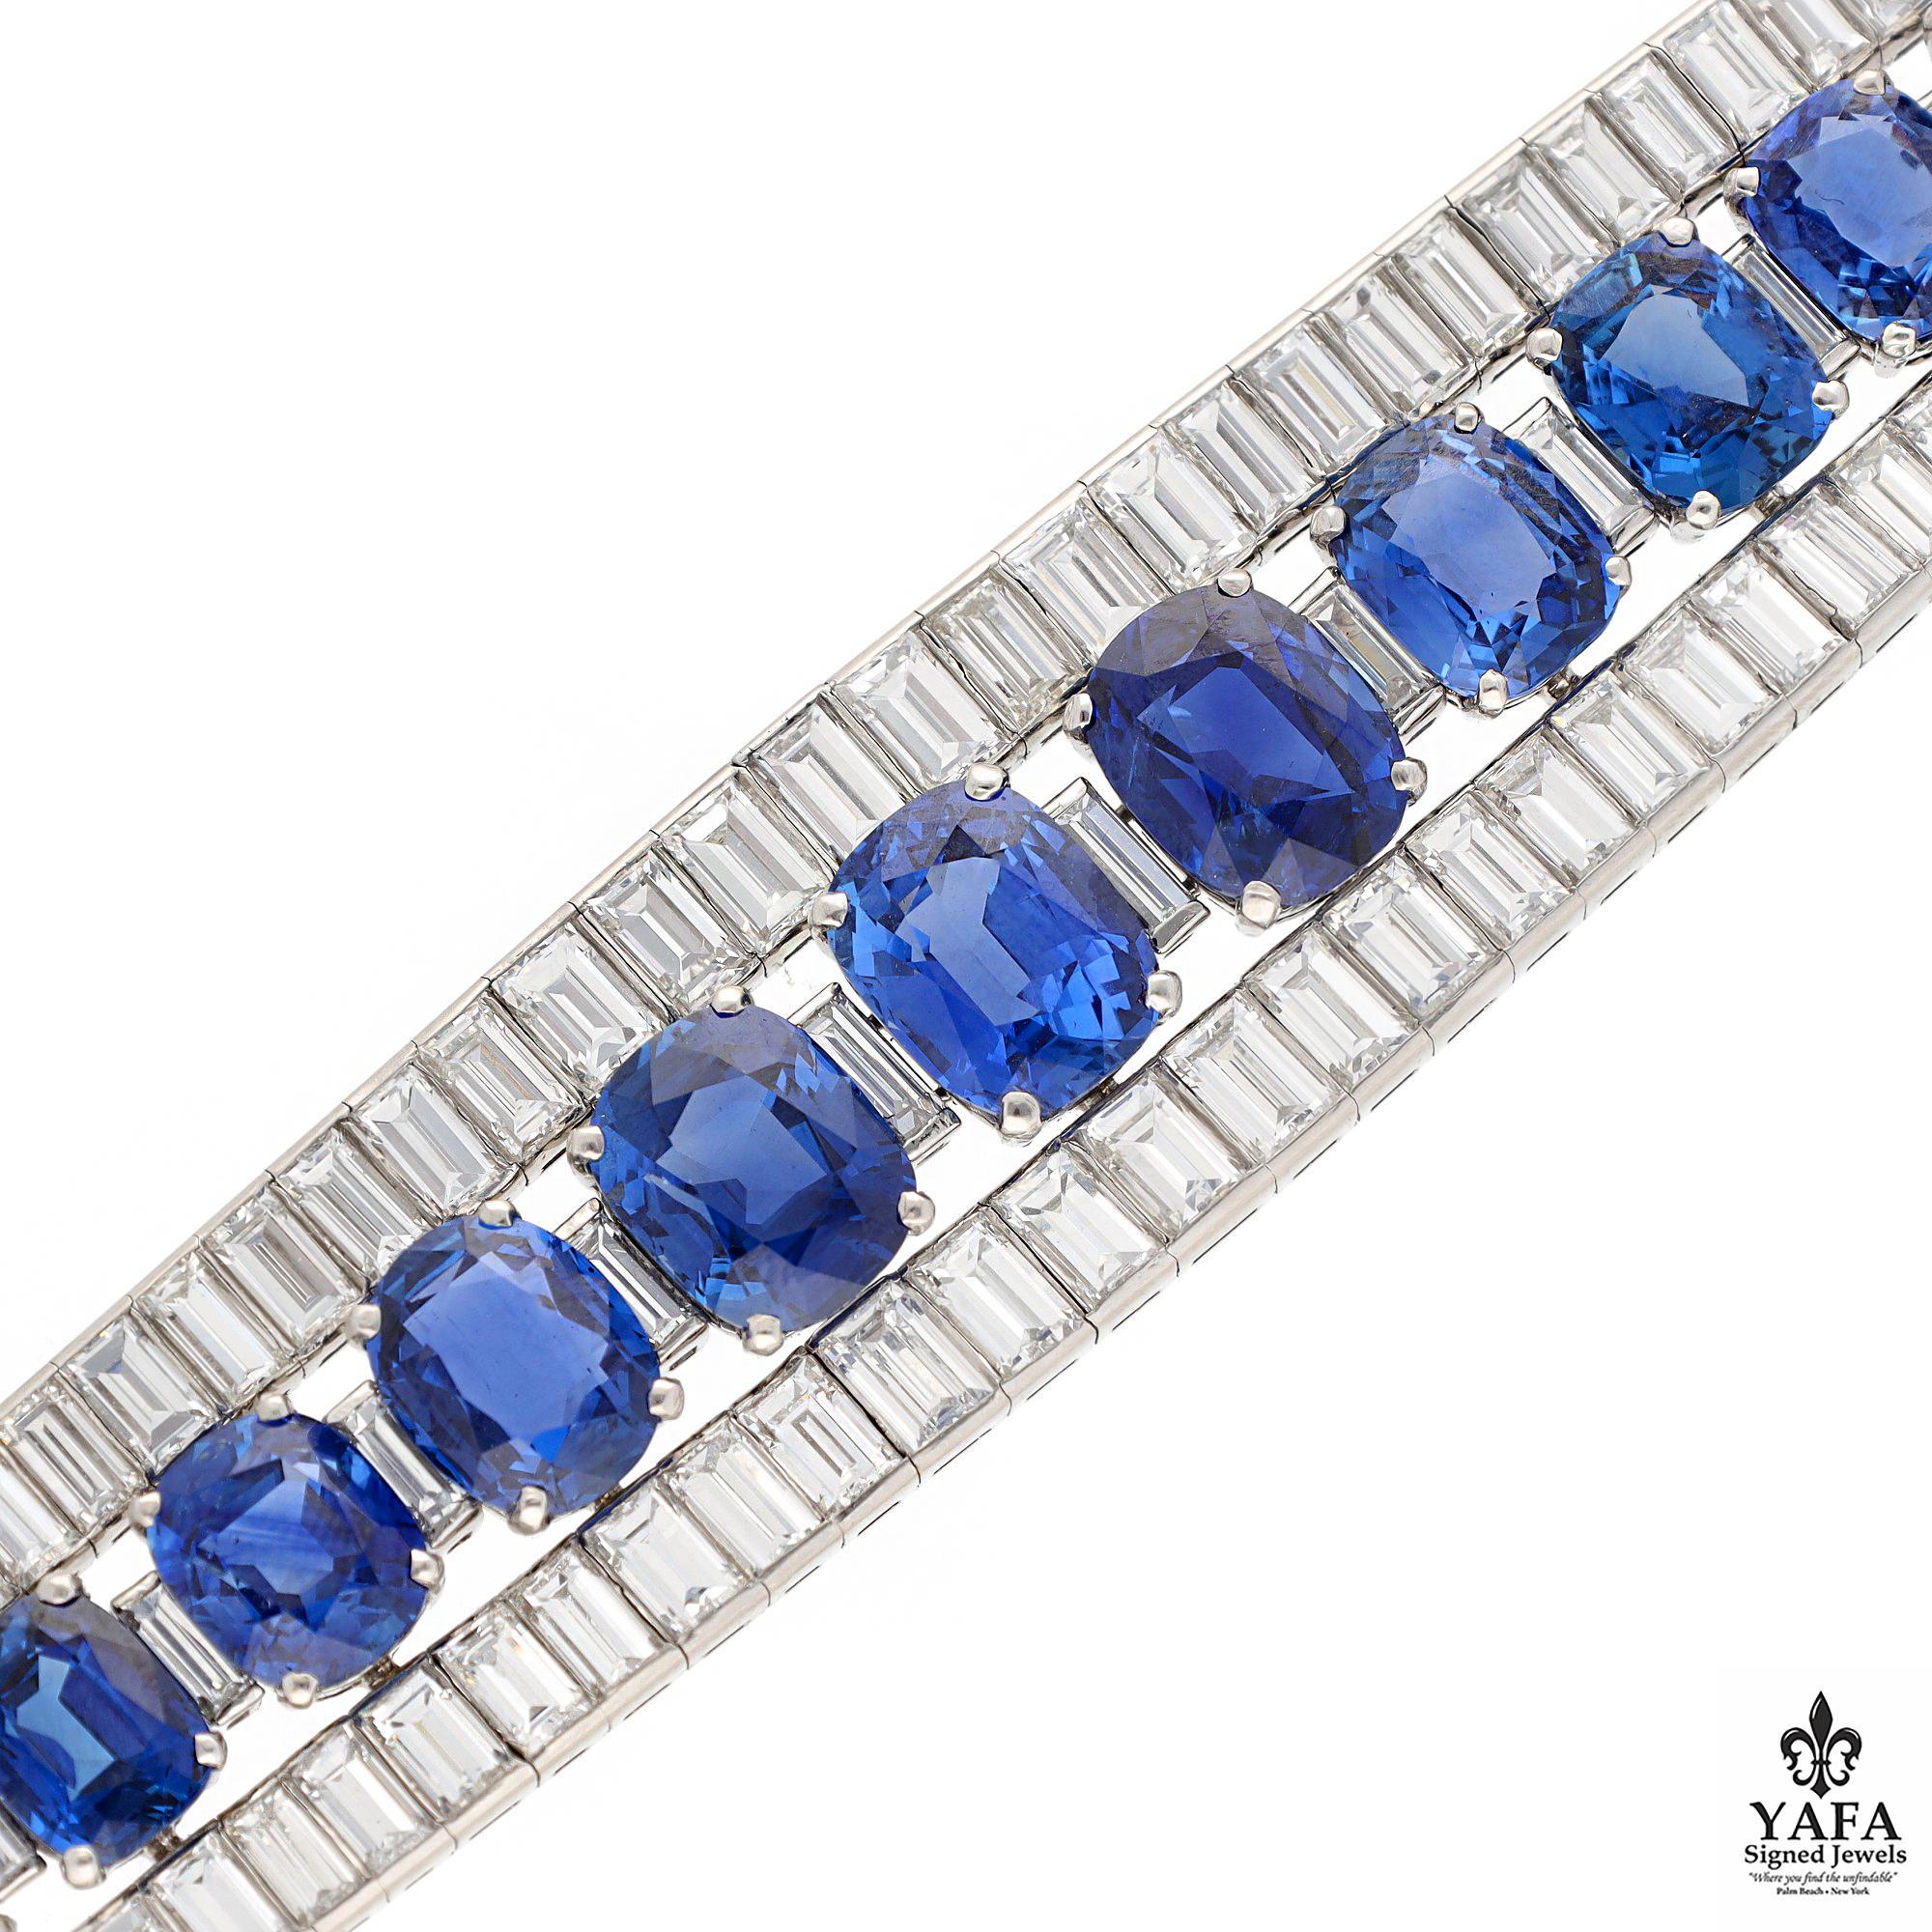 Van Cleef & Arpels Bracelet of Oval Sapphires Surrounded by Baguette Diamonds Which Embrace the Sapphires. 15 Oval No Heat Sapphires Consisting of, 6 - Kashmir, 8- Burma, 1 - Ceylon. Total Sapphire Weight 51.64 CTS, 137 Baguette Cut Diamonds. Total